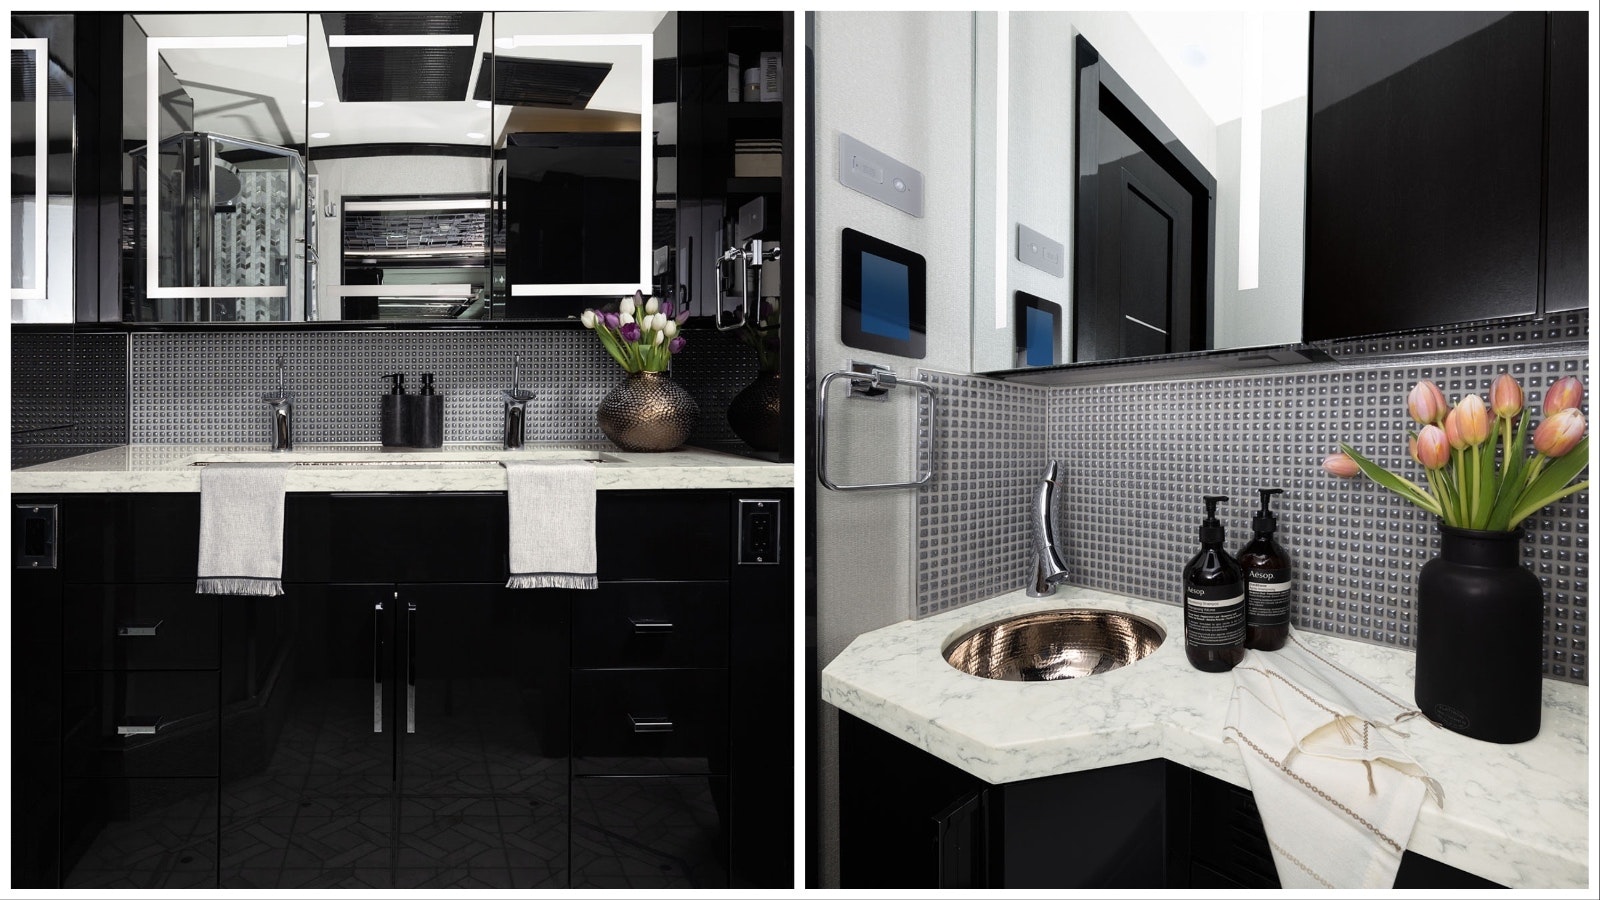 The high-end luxury King Aire model RV from Newmar includes multiple vanity area to freshen up.